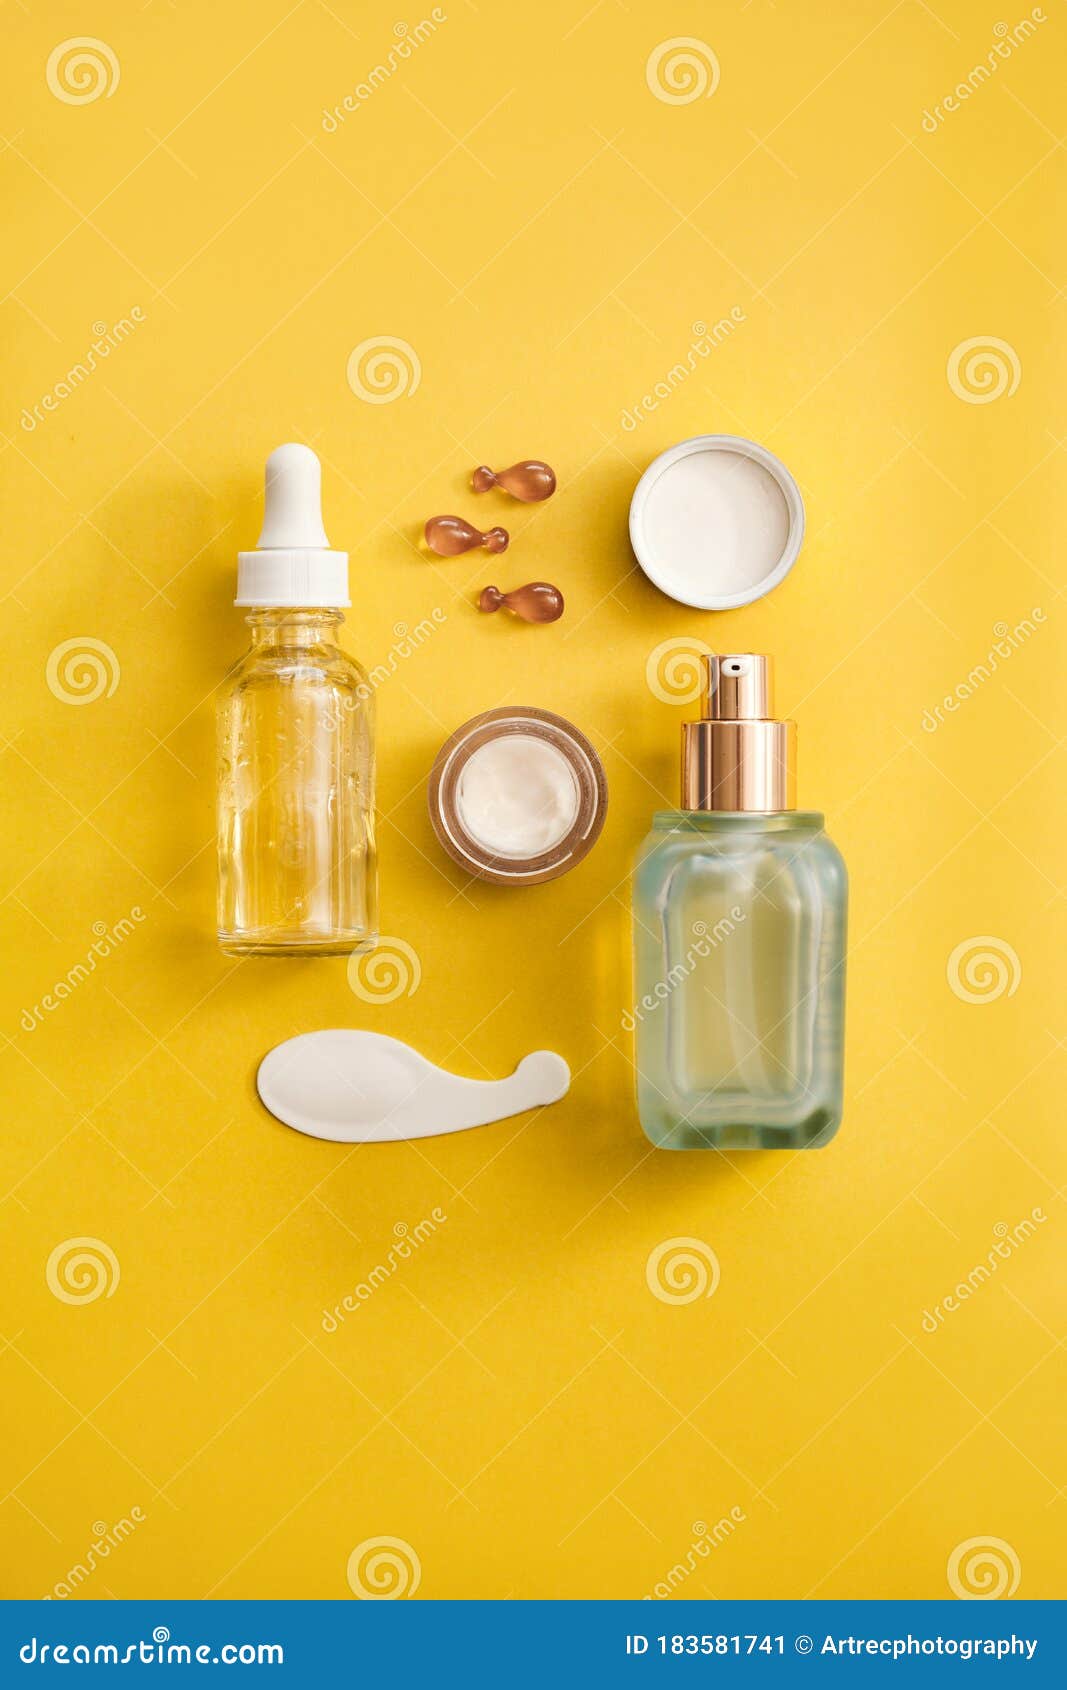 Download 38 205 Glass Oil Yellow Photos Free Royalty Free Stock Photos From Dreamstime Yellowimages Mockups